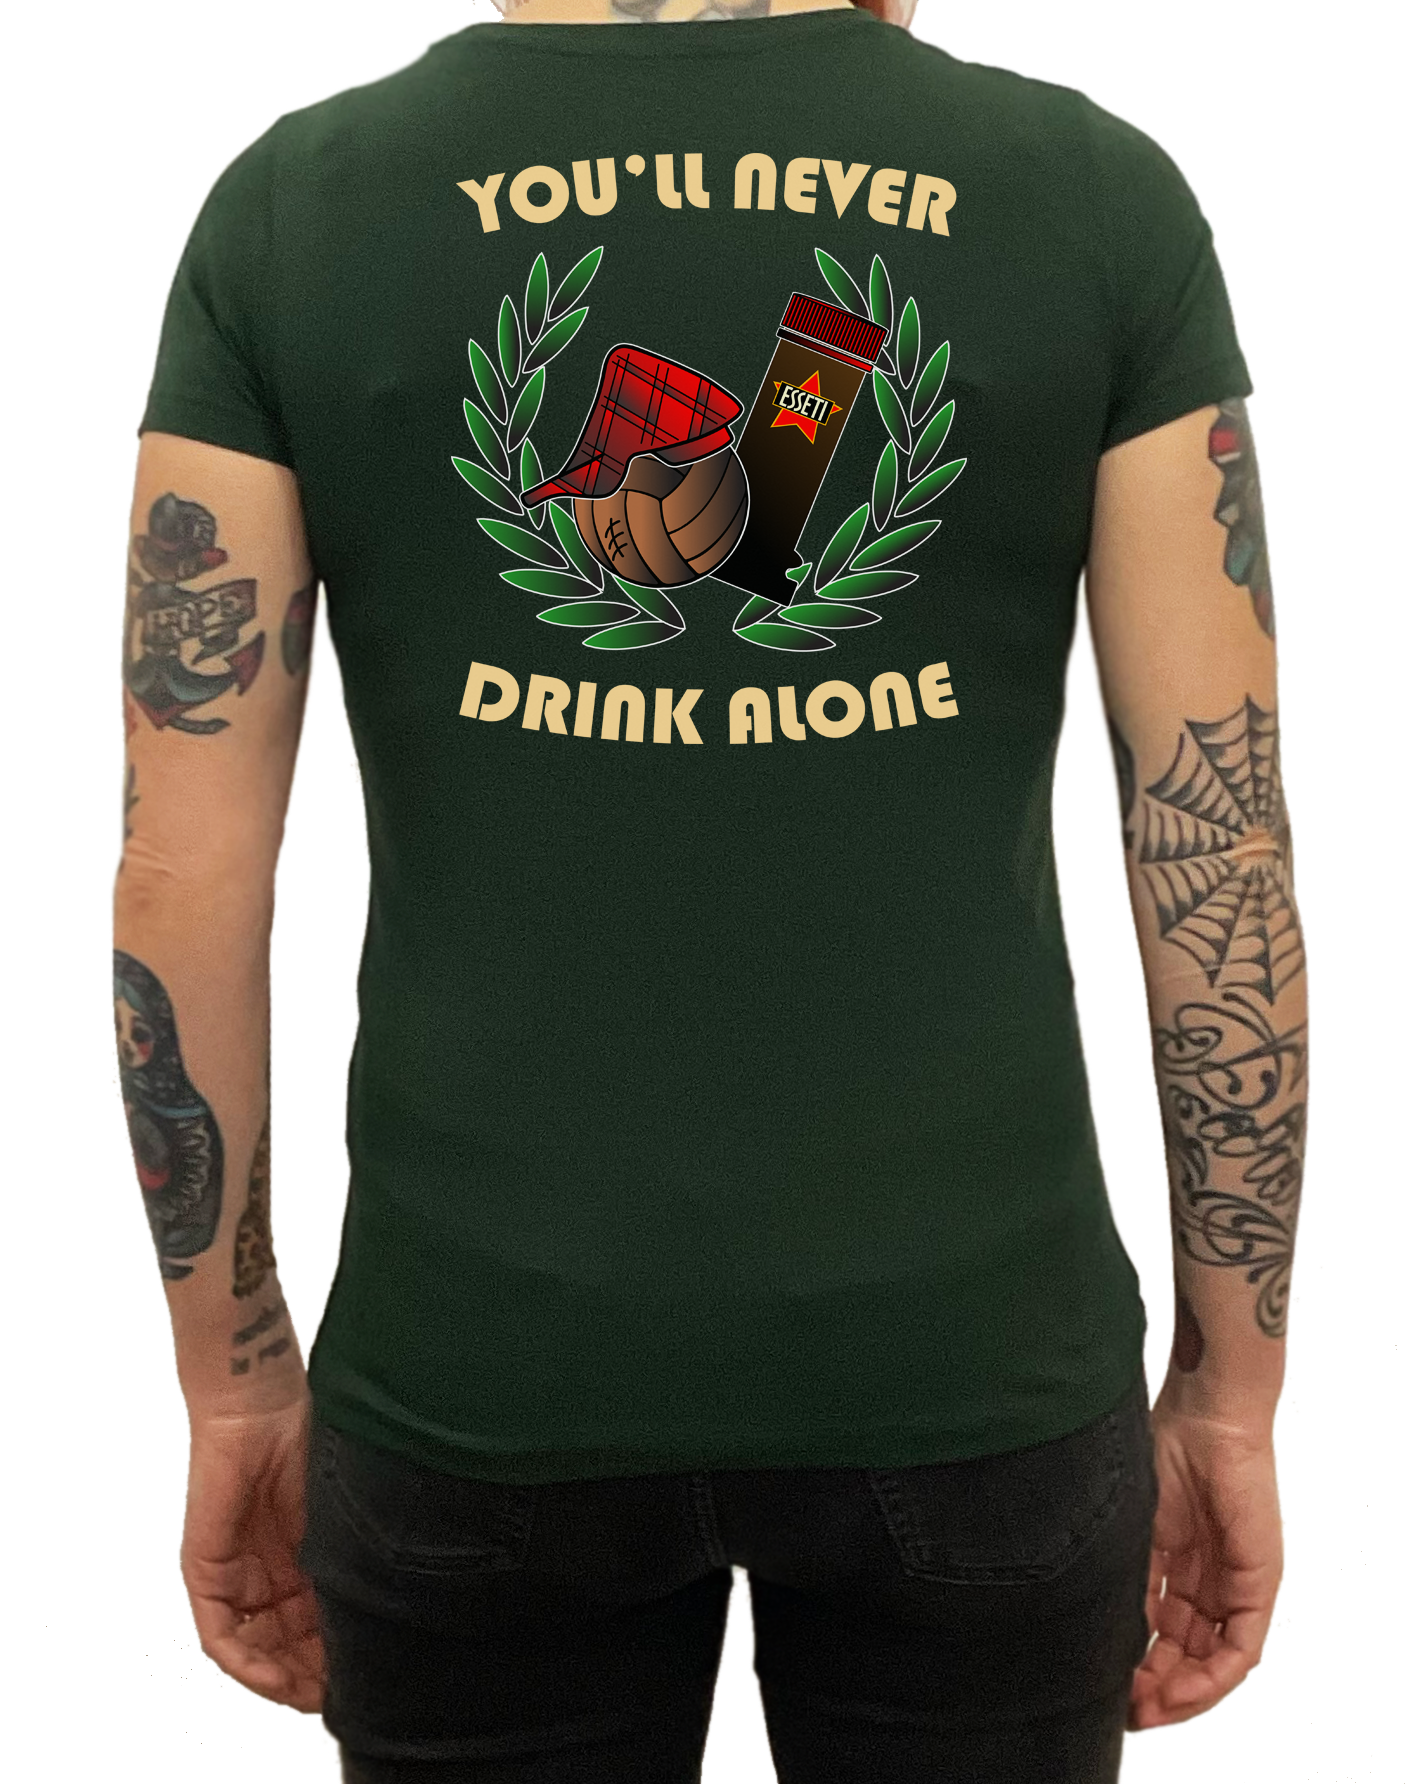 Never drink alone